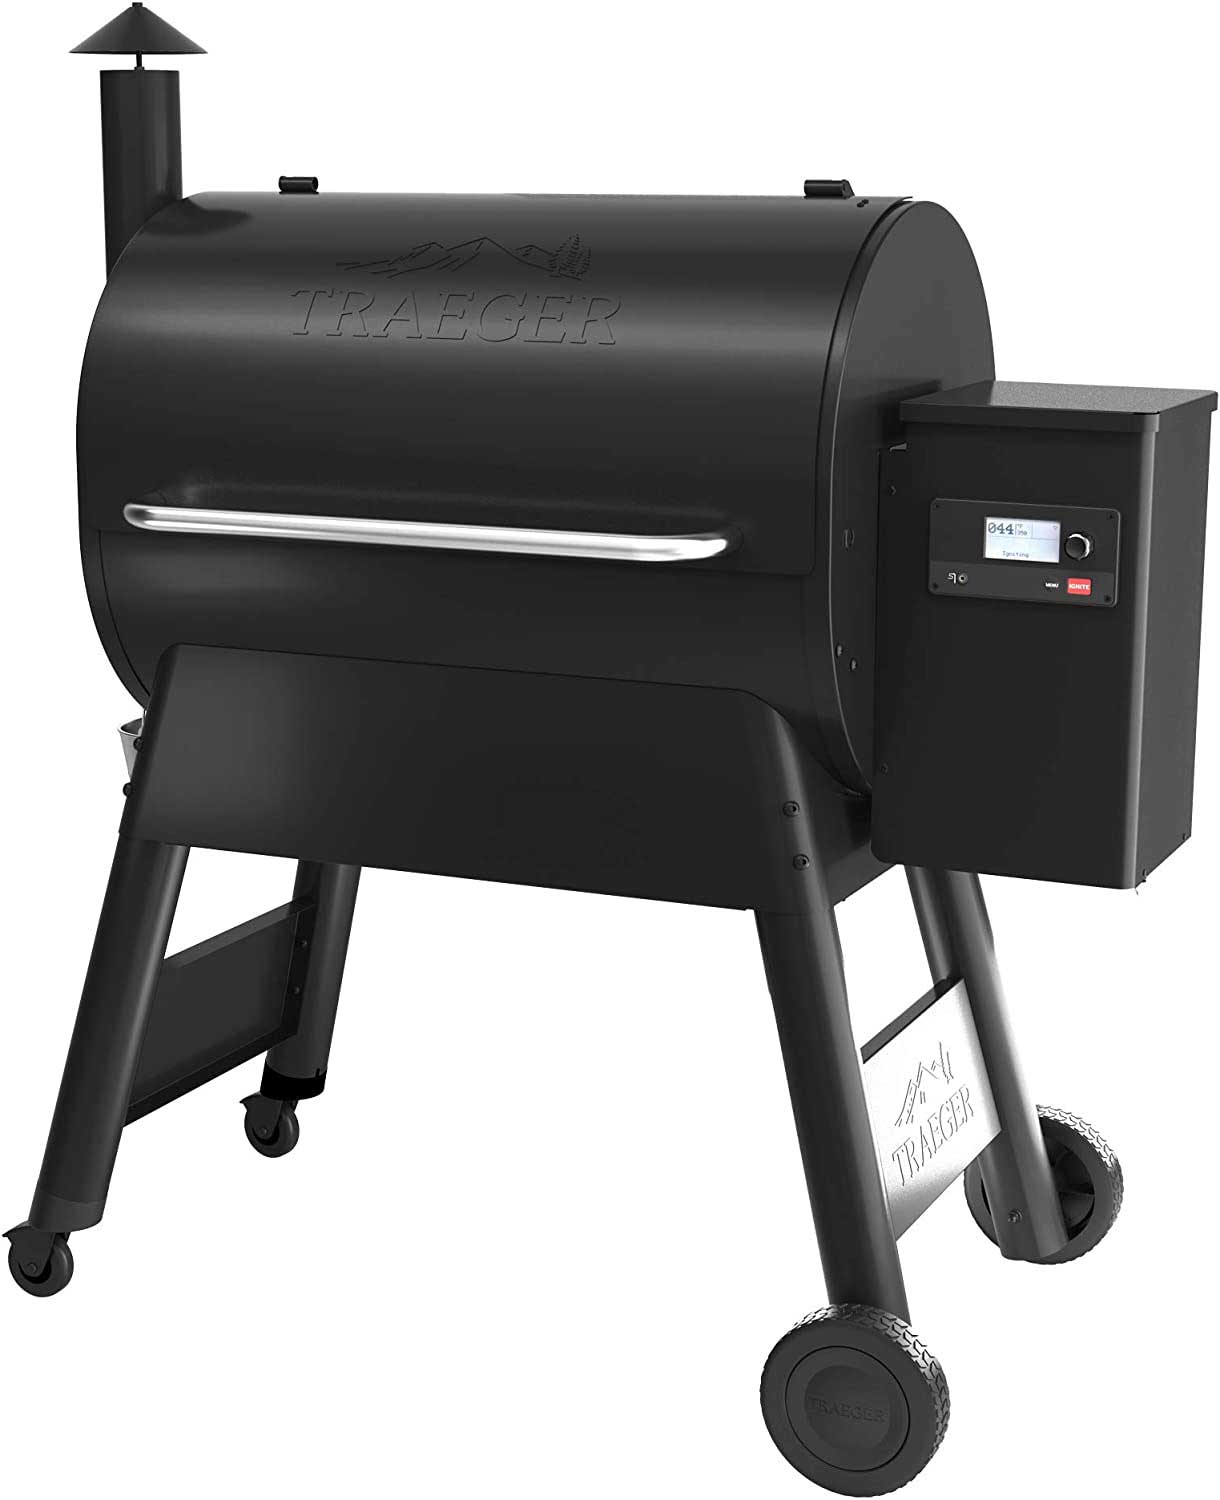 https://cyberguy.com/wp-content/uploads/2022/11/Traeger-Grills-Pro-Series-780-Wood-Pellet-Grill-and-Smoker.jpg